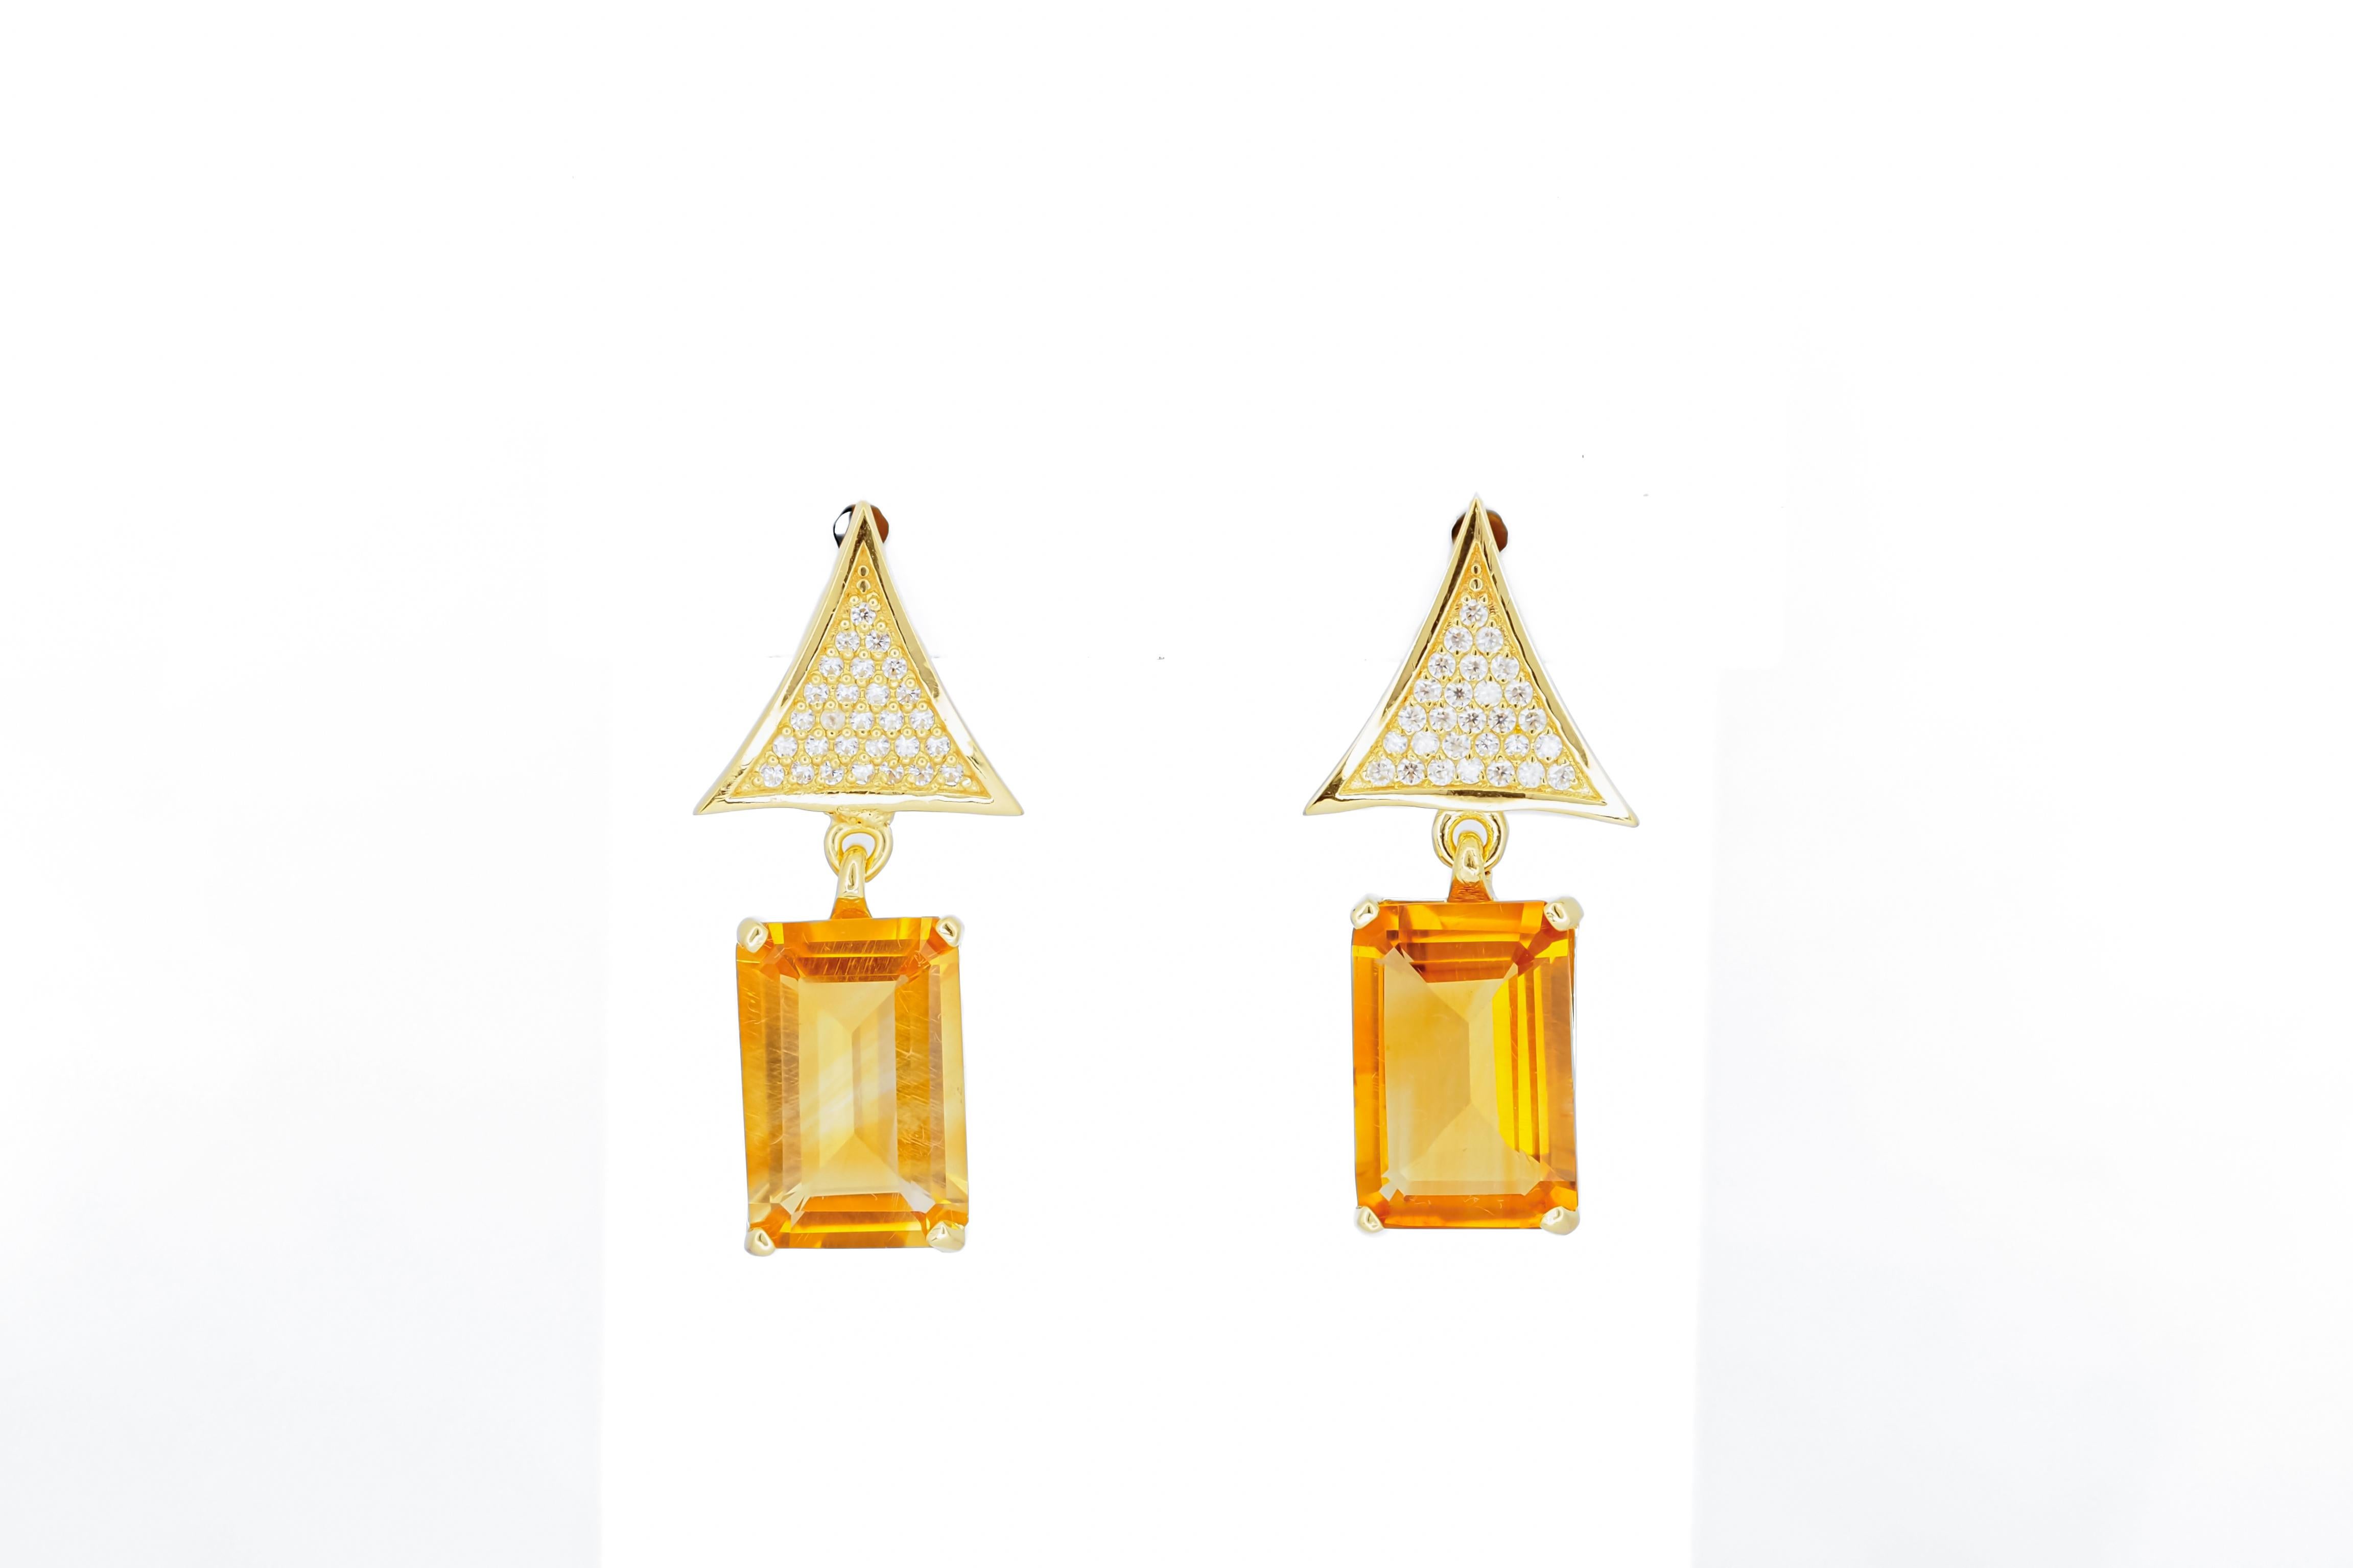 Citrine 14k gold earrings studs. 
Citrine statement earrings. Delicate citrine earrings studs. Diamond triangle earrings.

Metal: 14k gold
weight: 4 gr
Earrings size: 23x11 mm

Set with citrines, color - yellow 
Emerald cut, apx 6 ct. in